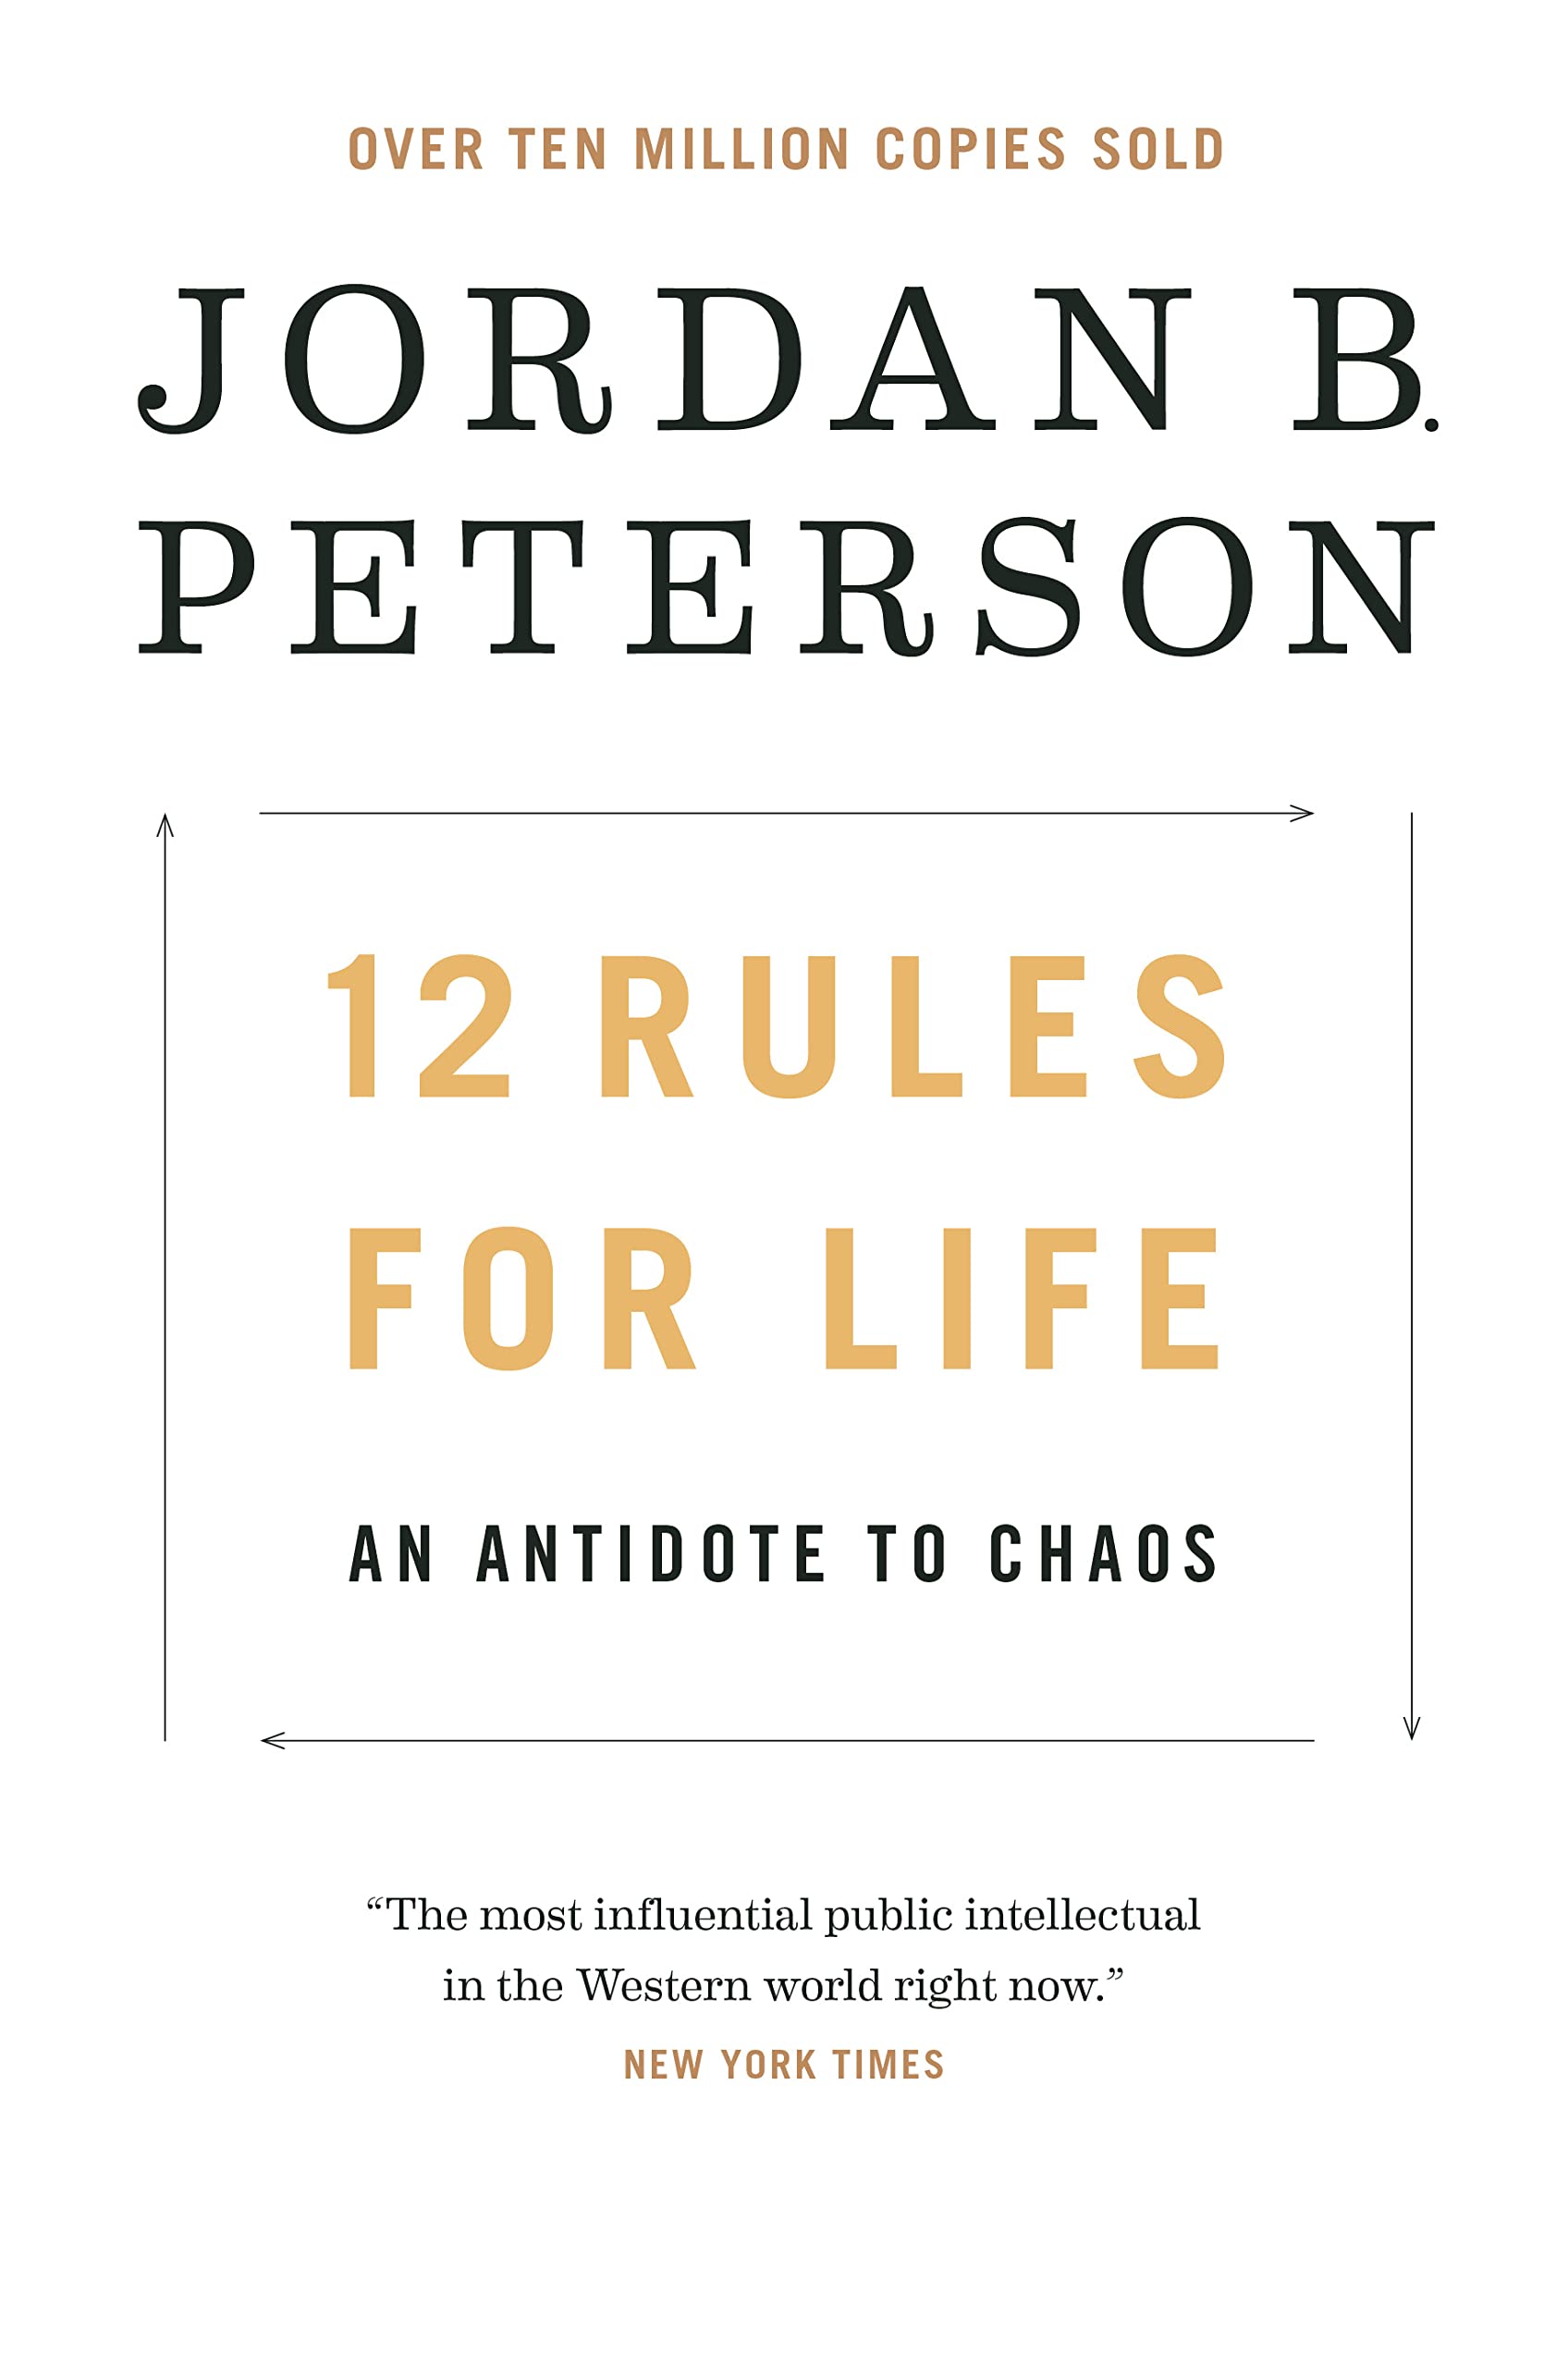 12 Rules for Life: An Antidote to Chaos (eBook) by Jordan B. Peterson $2.99